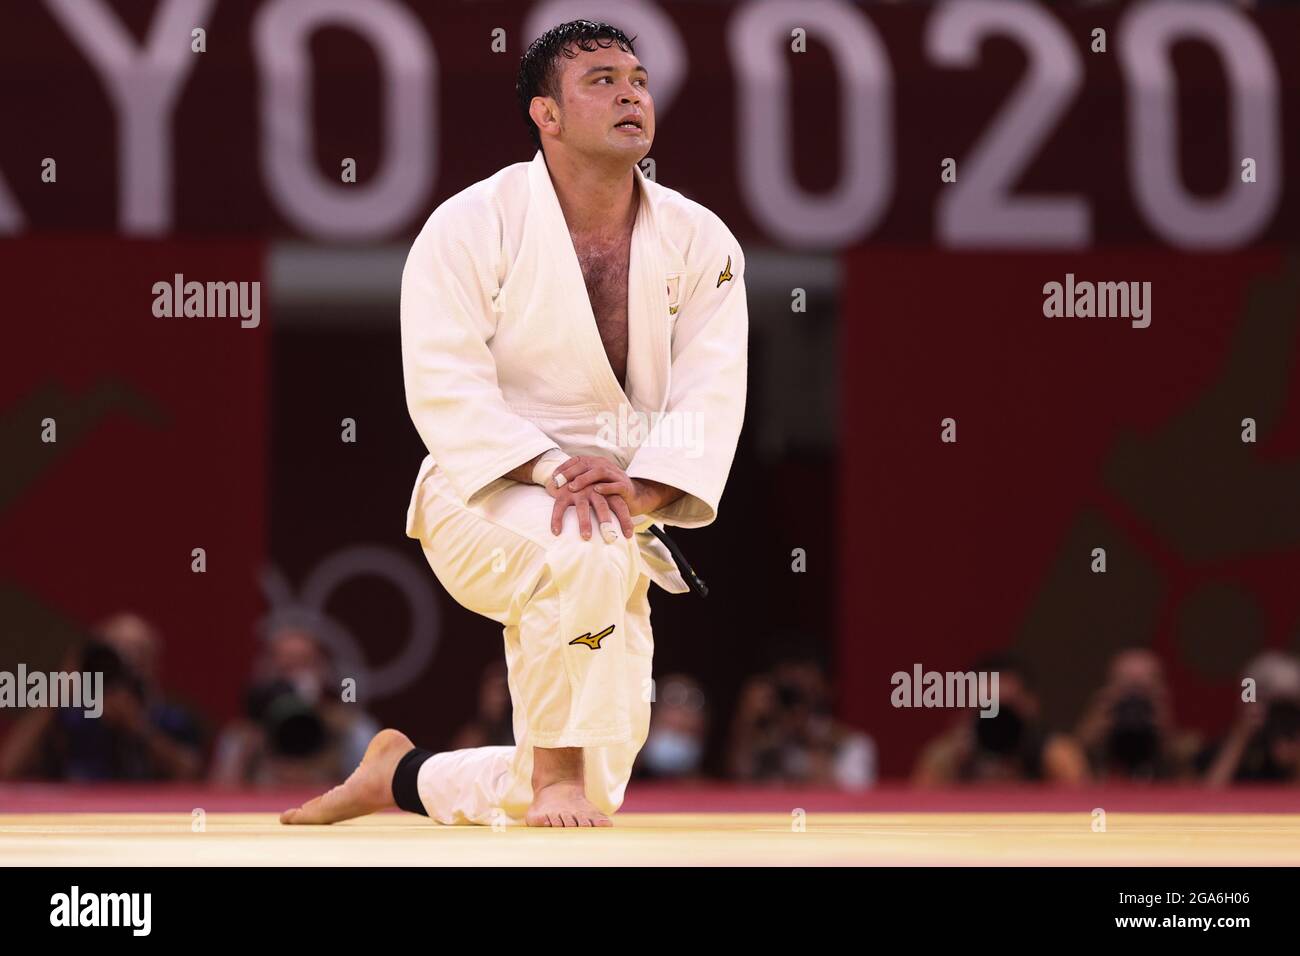 Tokio, Japan. 29th July, 2021. Judo: Olympia, 100 kg, men, final, Wolf (Japan) - Cho (South Korea), at the Nippon Budokan. Aaron Wolf kneels on the mat. Credit: Oliver Weiken/dpa/Alamy Live News Stock Photo